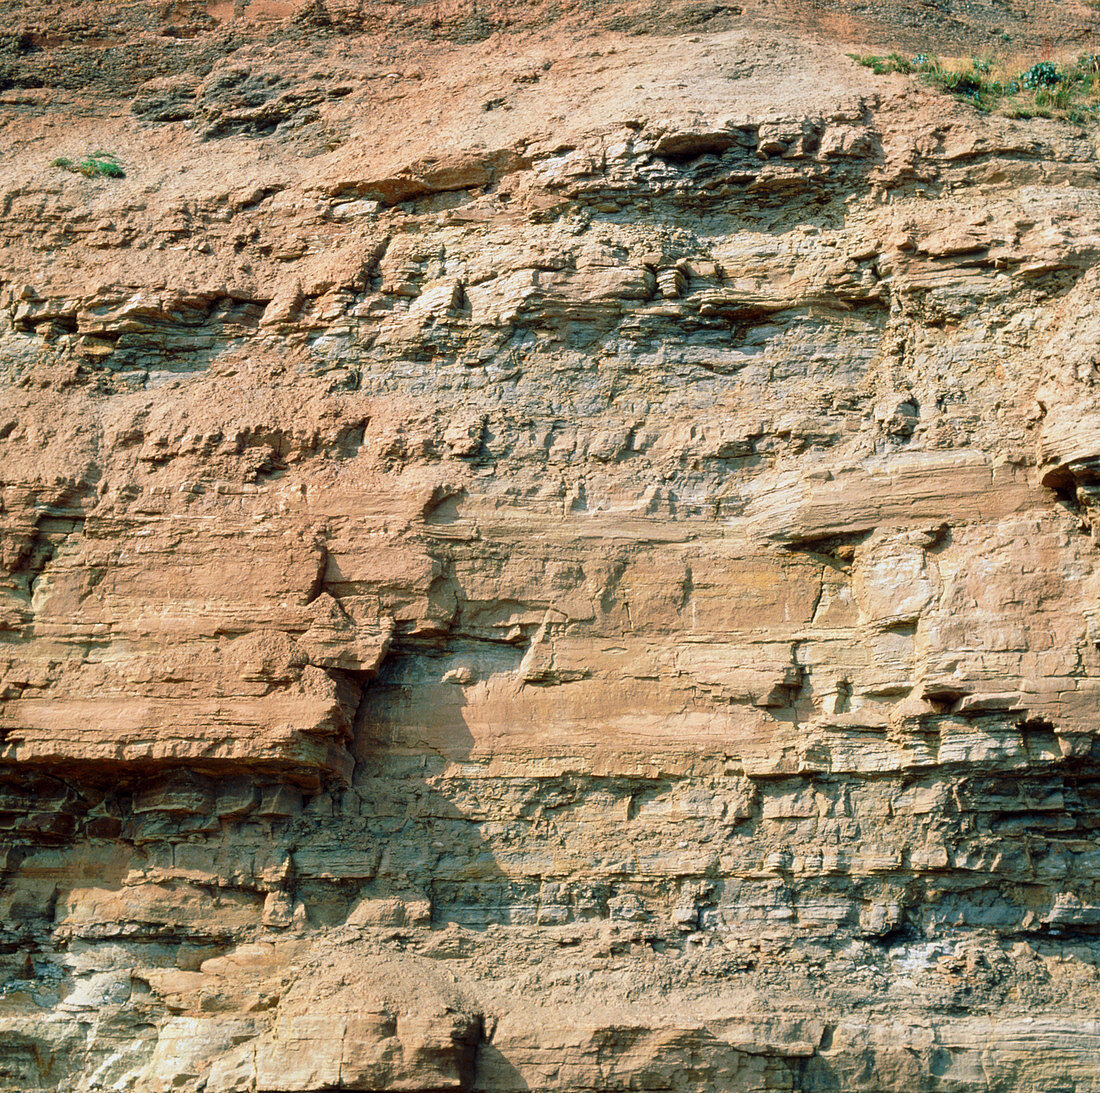 Macrophotograph of sandstone and shale cliff